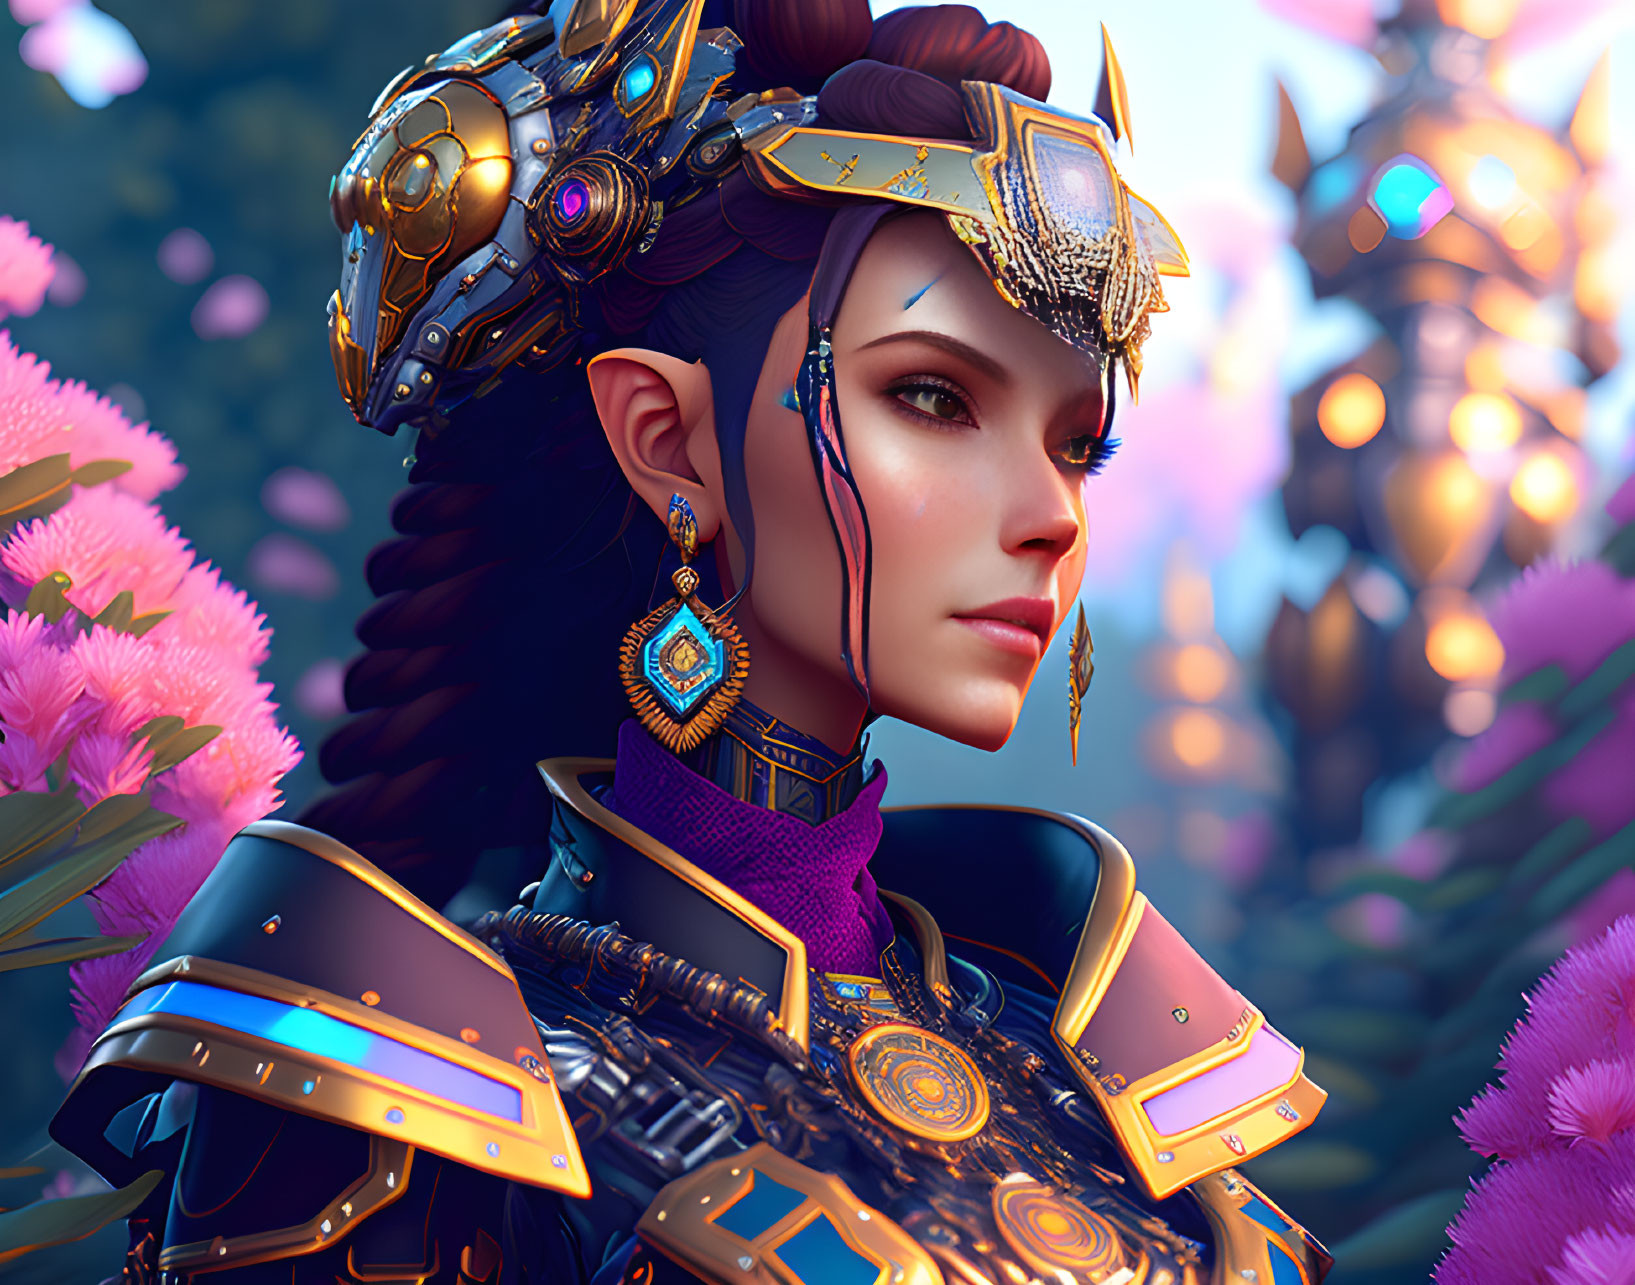 Digital artwork: Woman in futuristic armor with gold accents, surrounded by vibrant pink flora